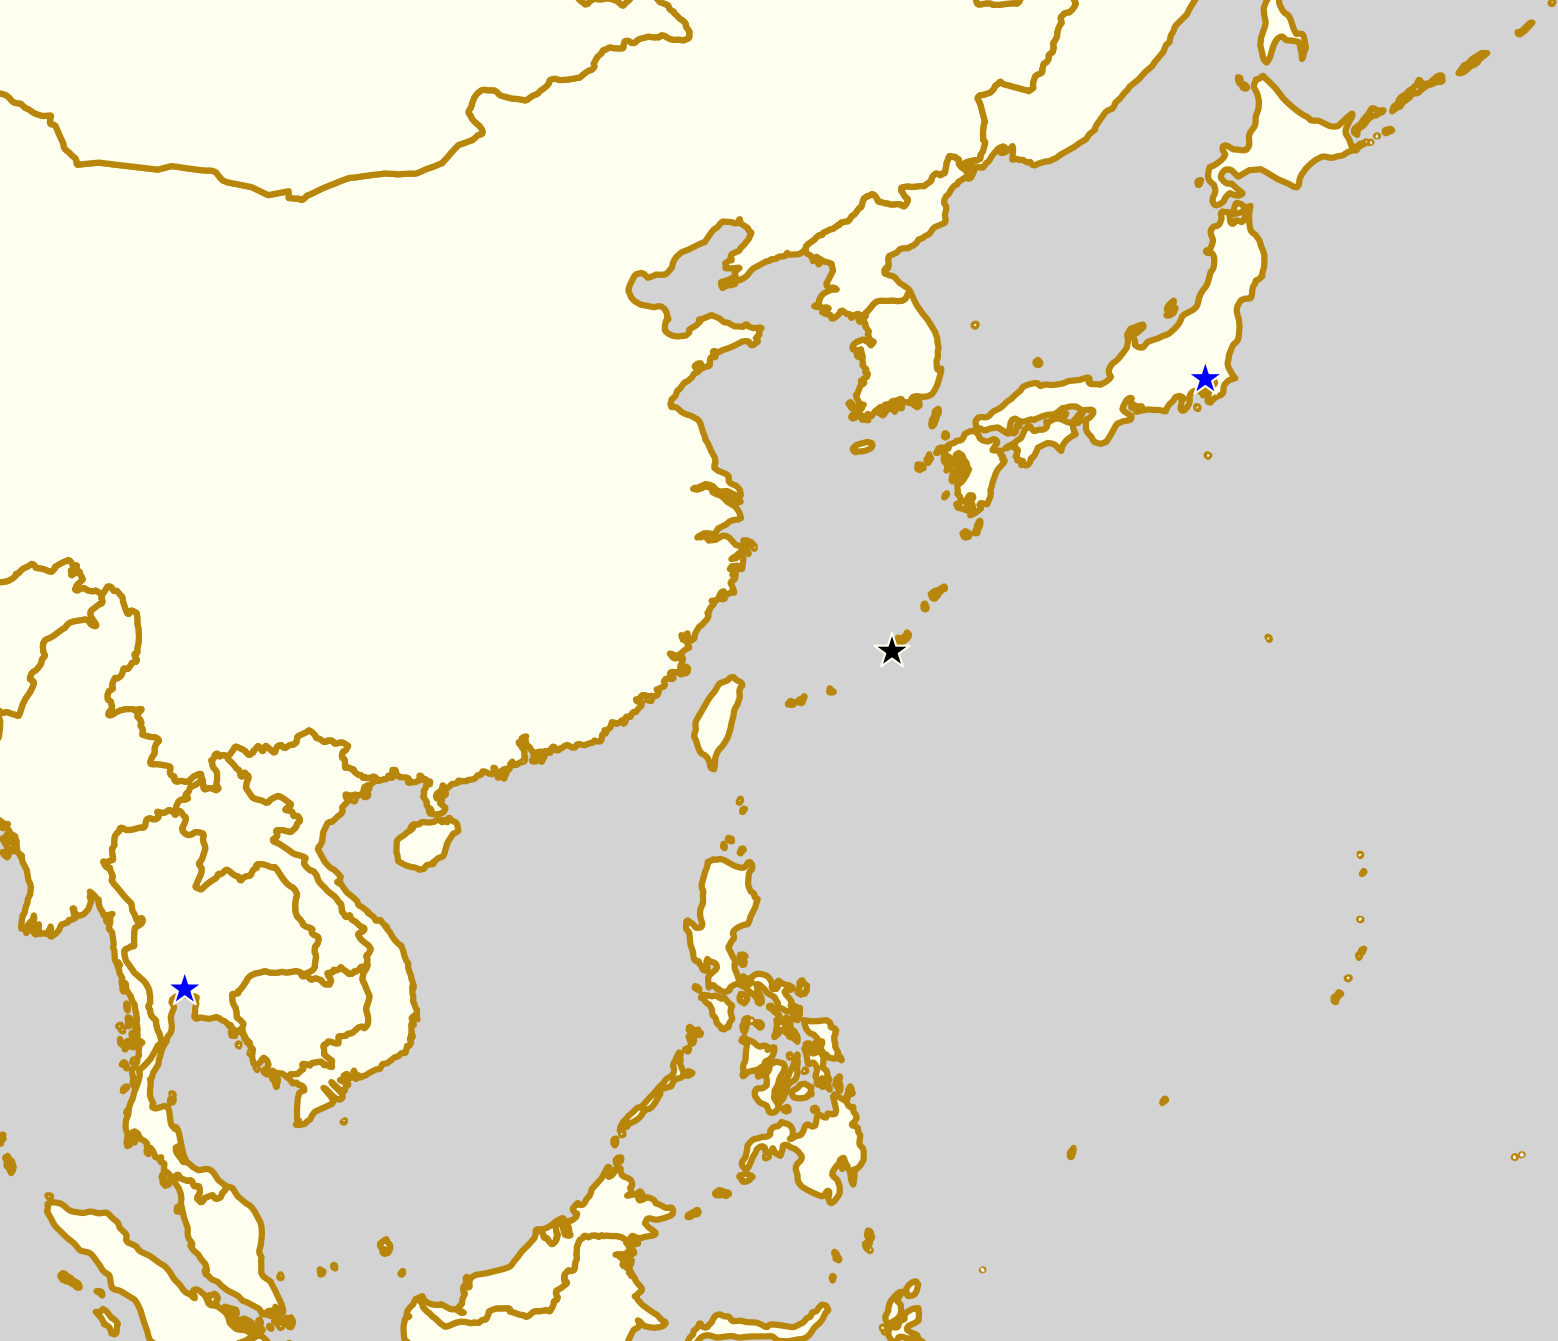 ASIA_map